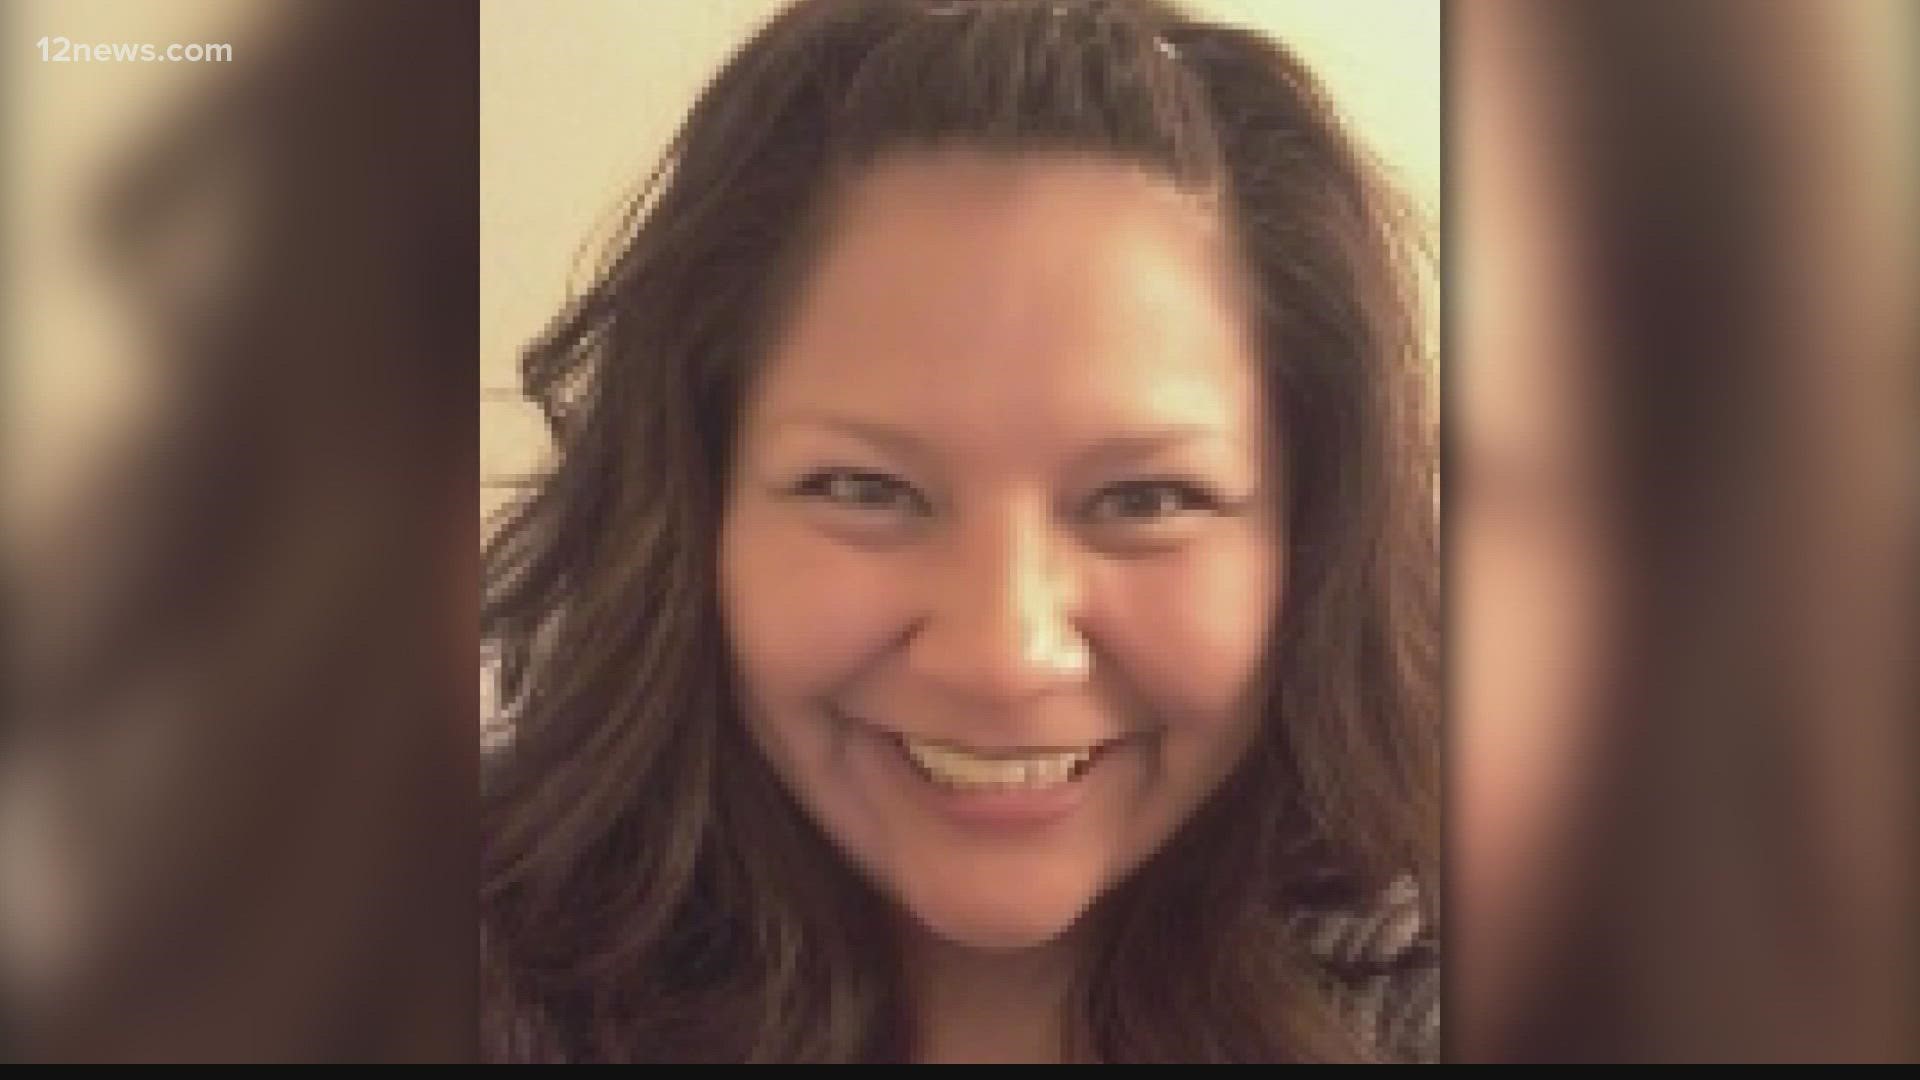 Jason Thornburg admitted to dismembering and burning three bodies in Texas before allegedly confessing to killing his girlfriend, an Arizona woman named Tanya Begay.